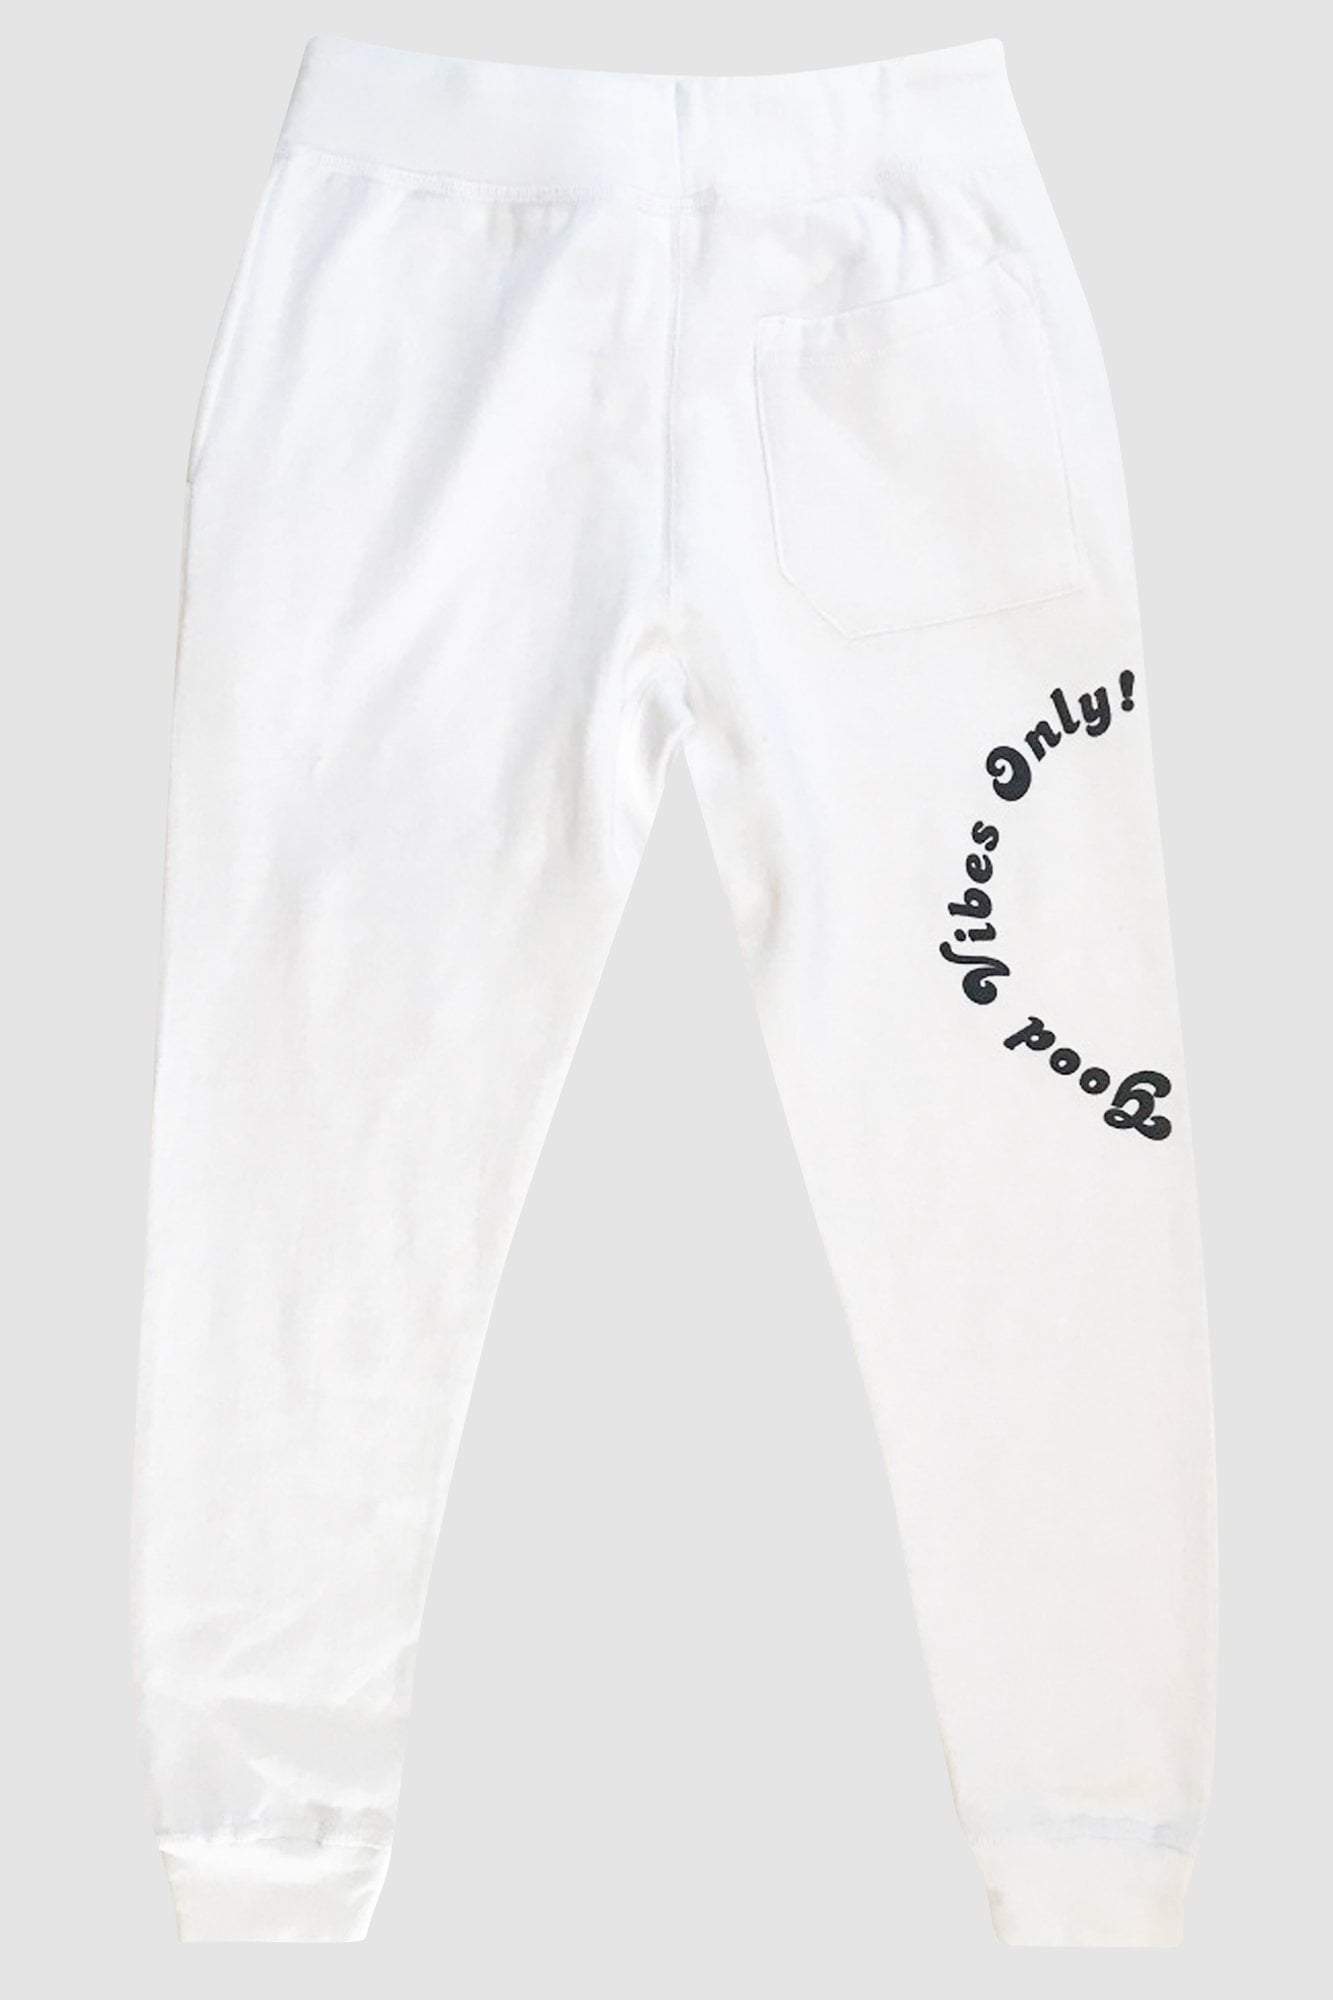 GOOD VIBES ONLY Unisex Sweatpants - White